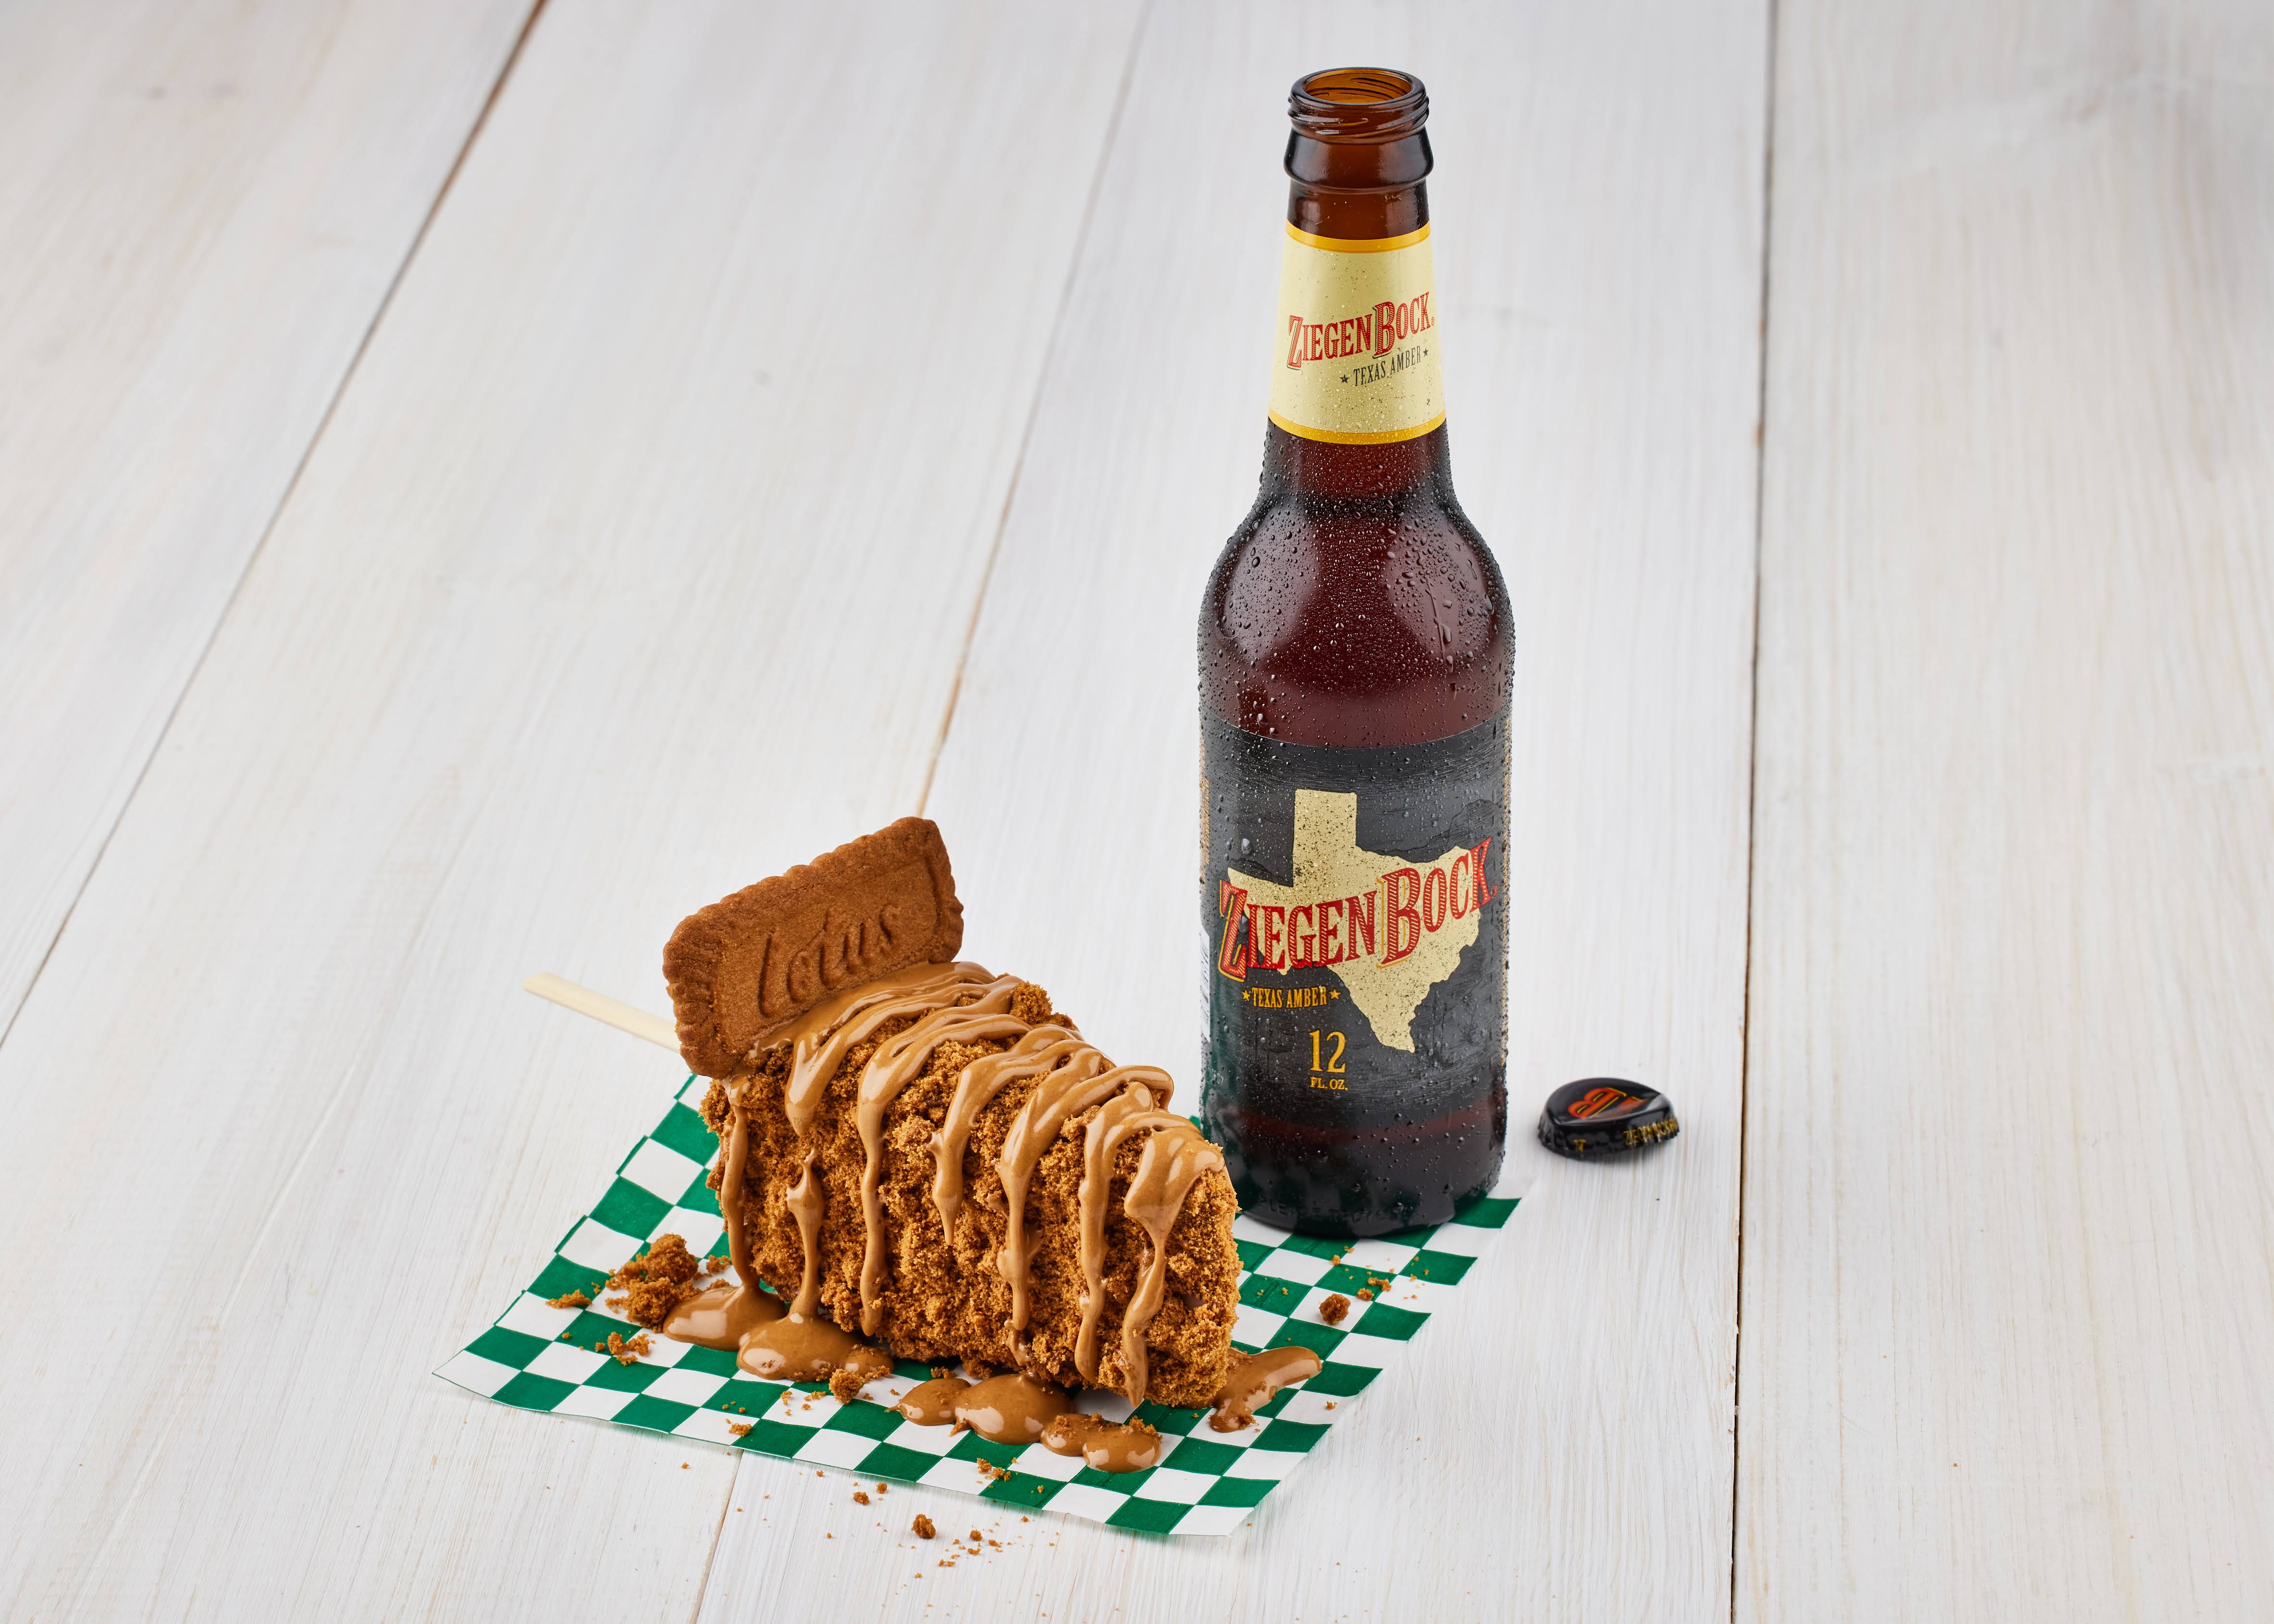 A slice of cheesecake is covered in brown sauce and cookie crumbles. To the right is a bottle of beer.